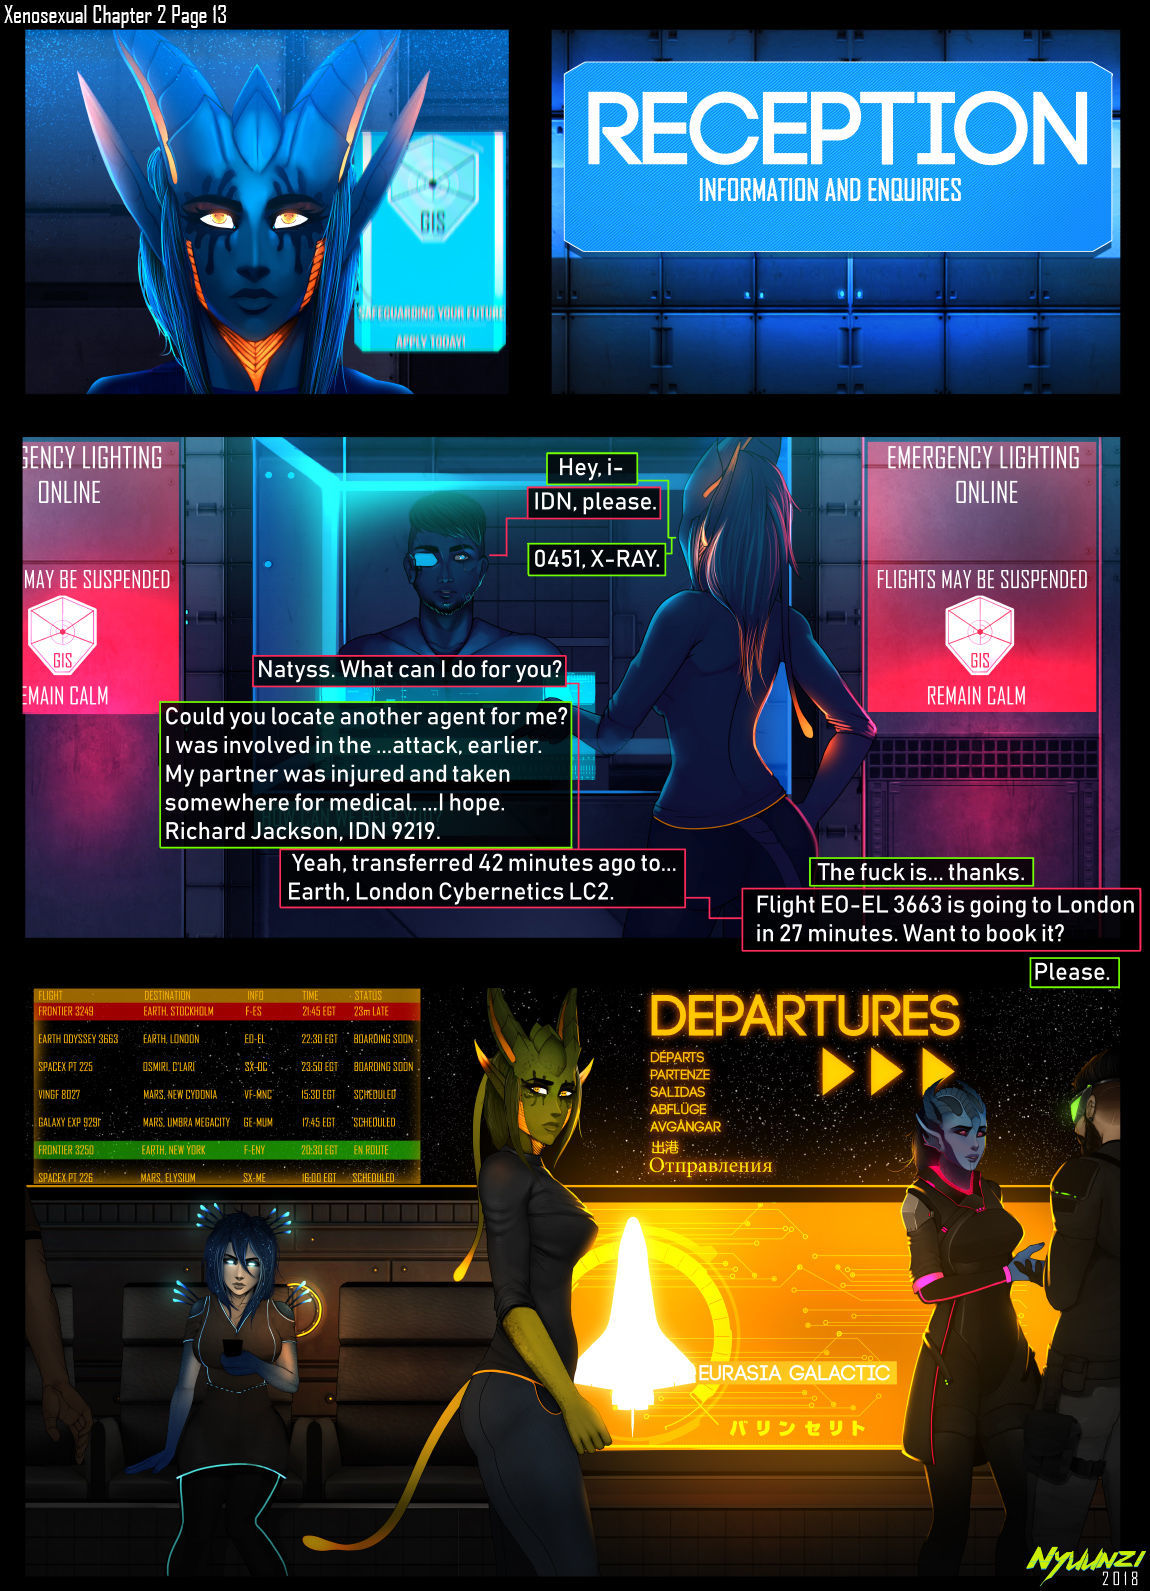 Xenosexual Mass Effect page 26